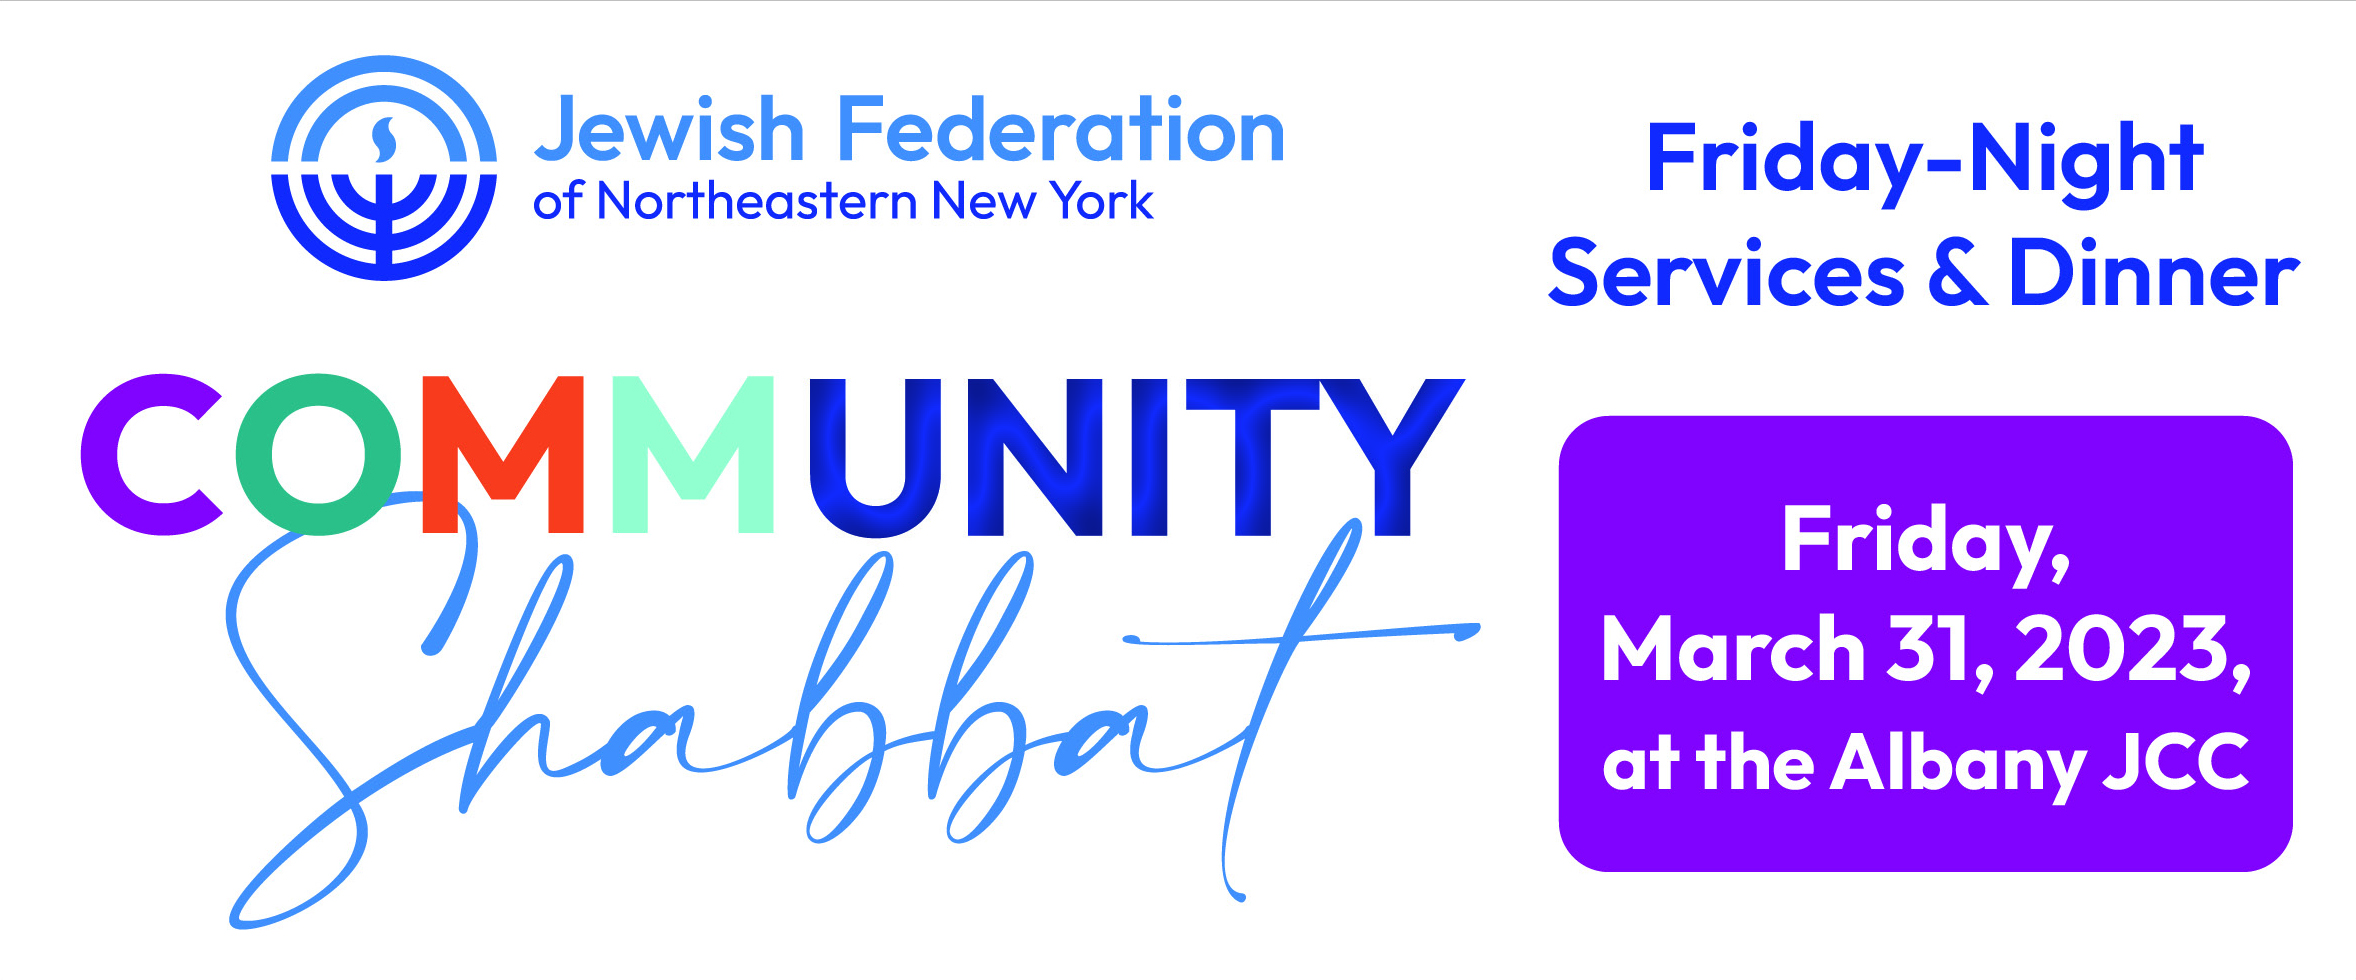 First-ever community Shabbat experience